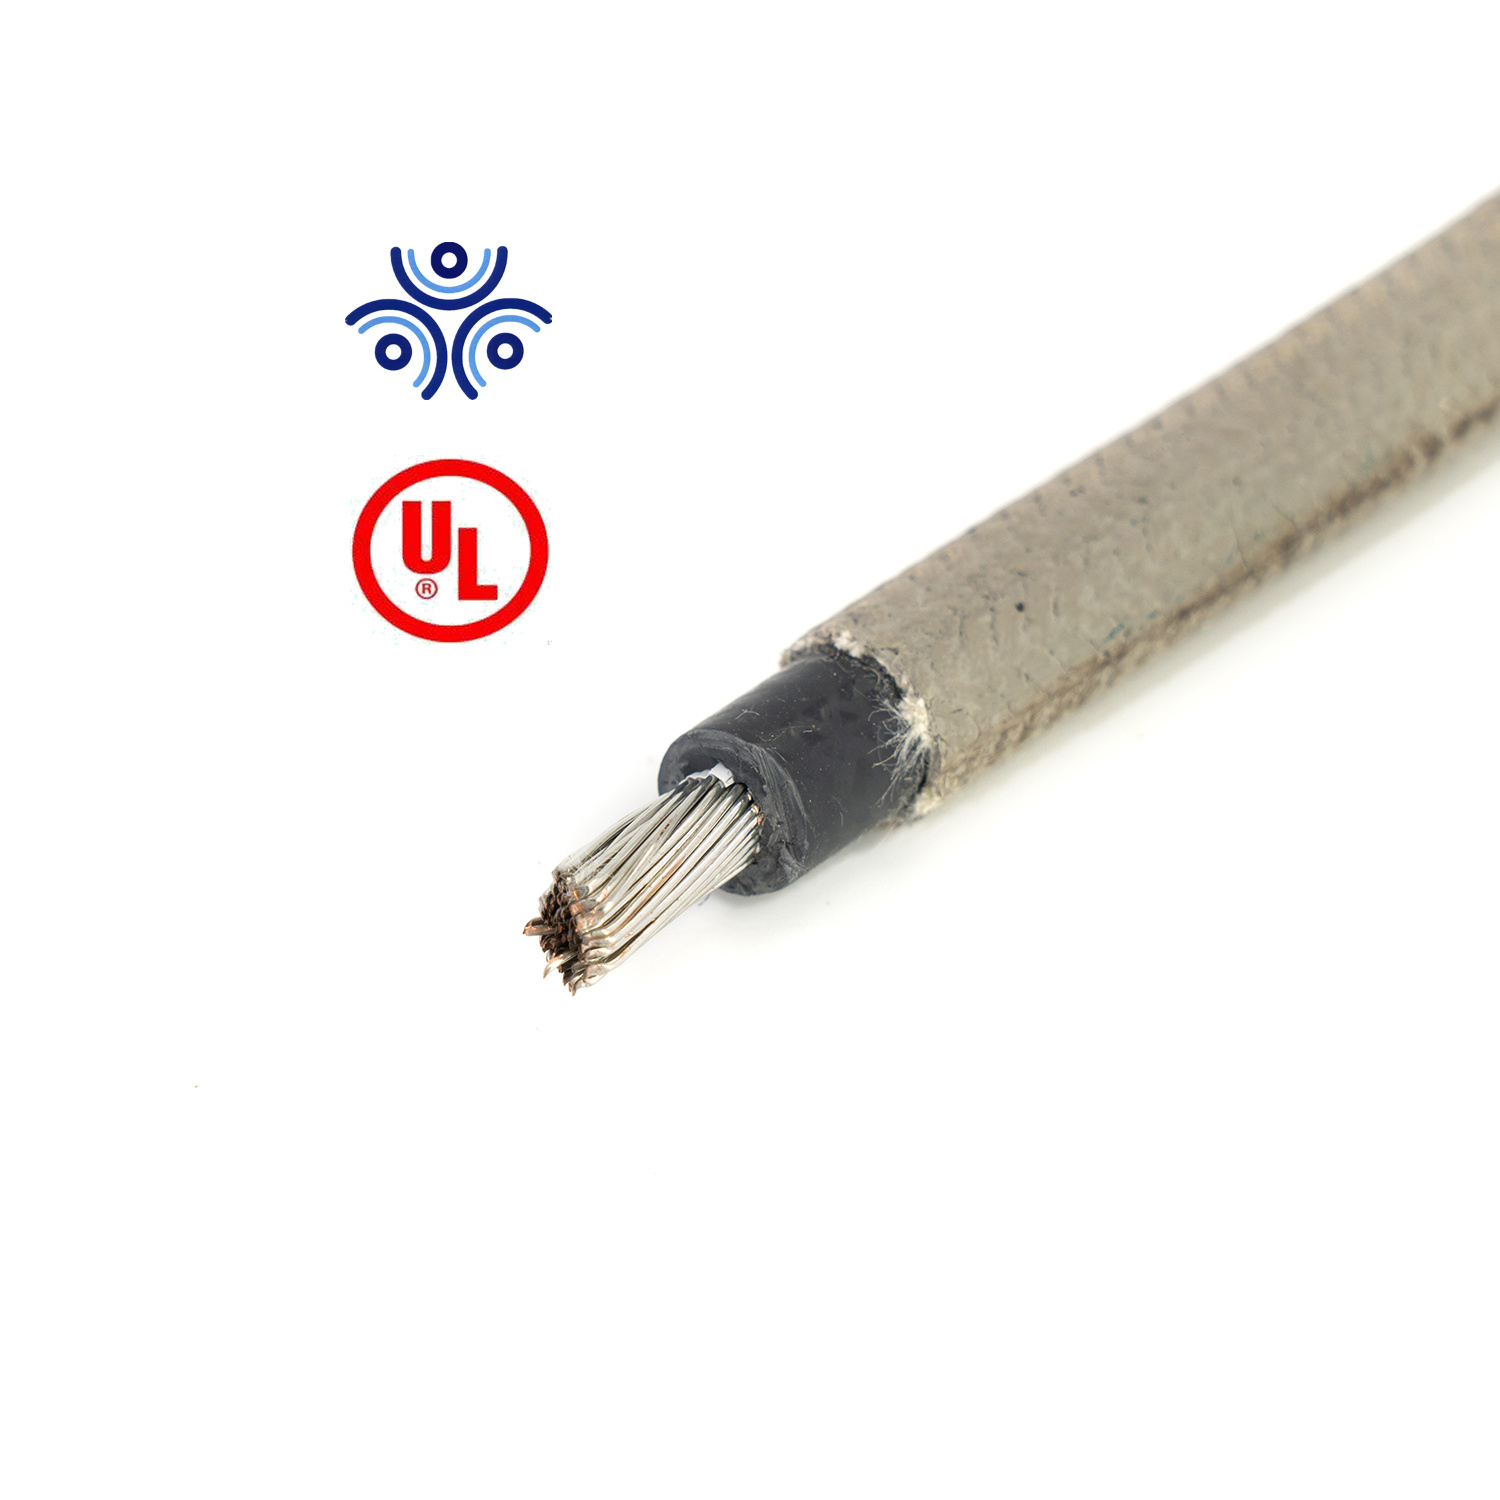 Ht Cables Power 5g Tinned Copper Wire Rru Cable Telecom